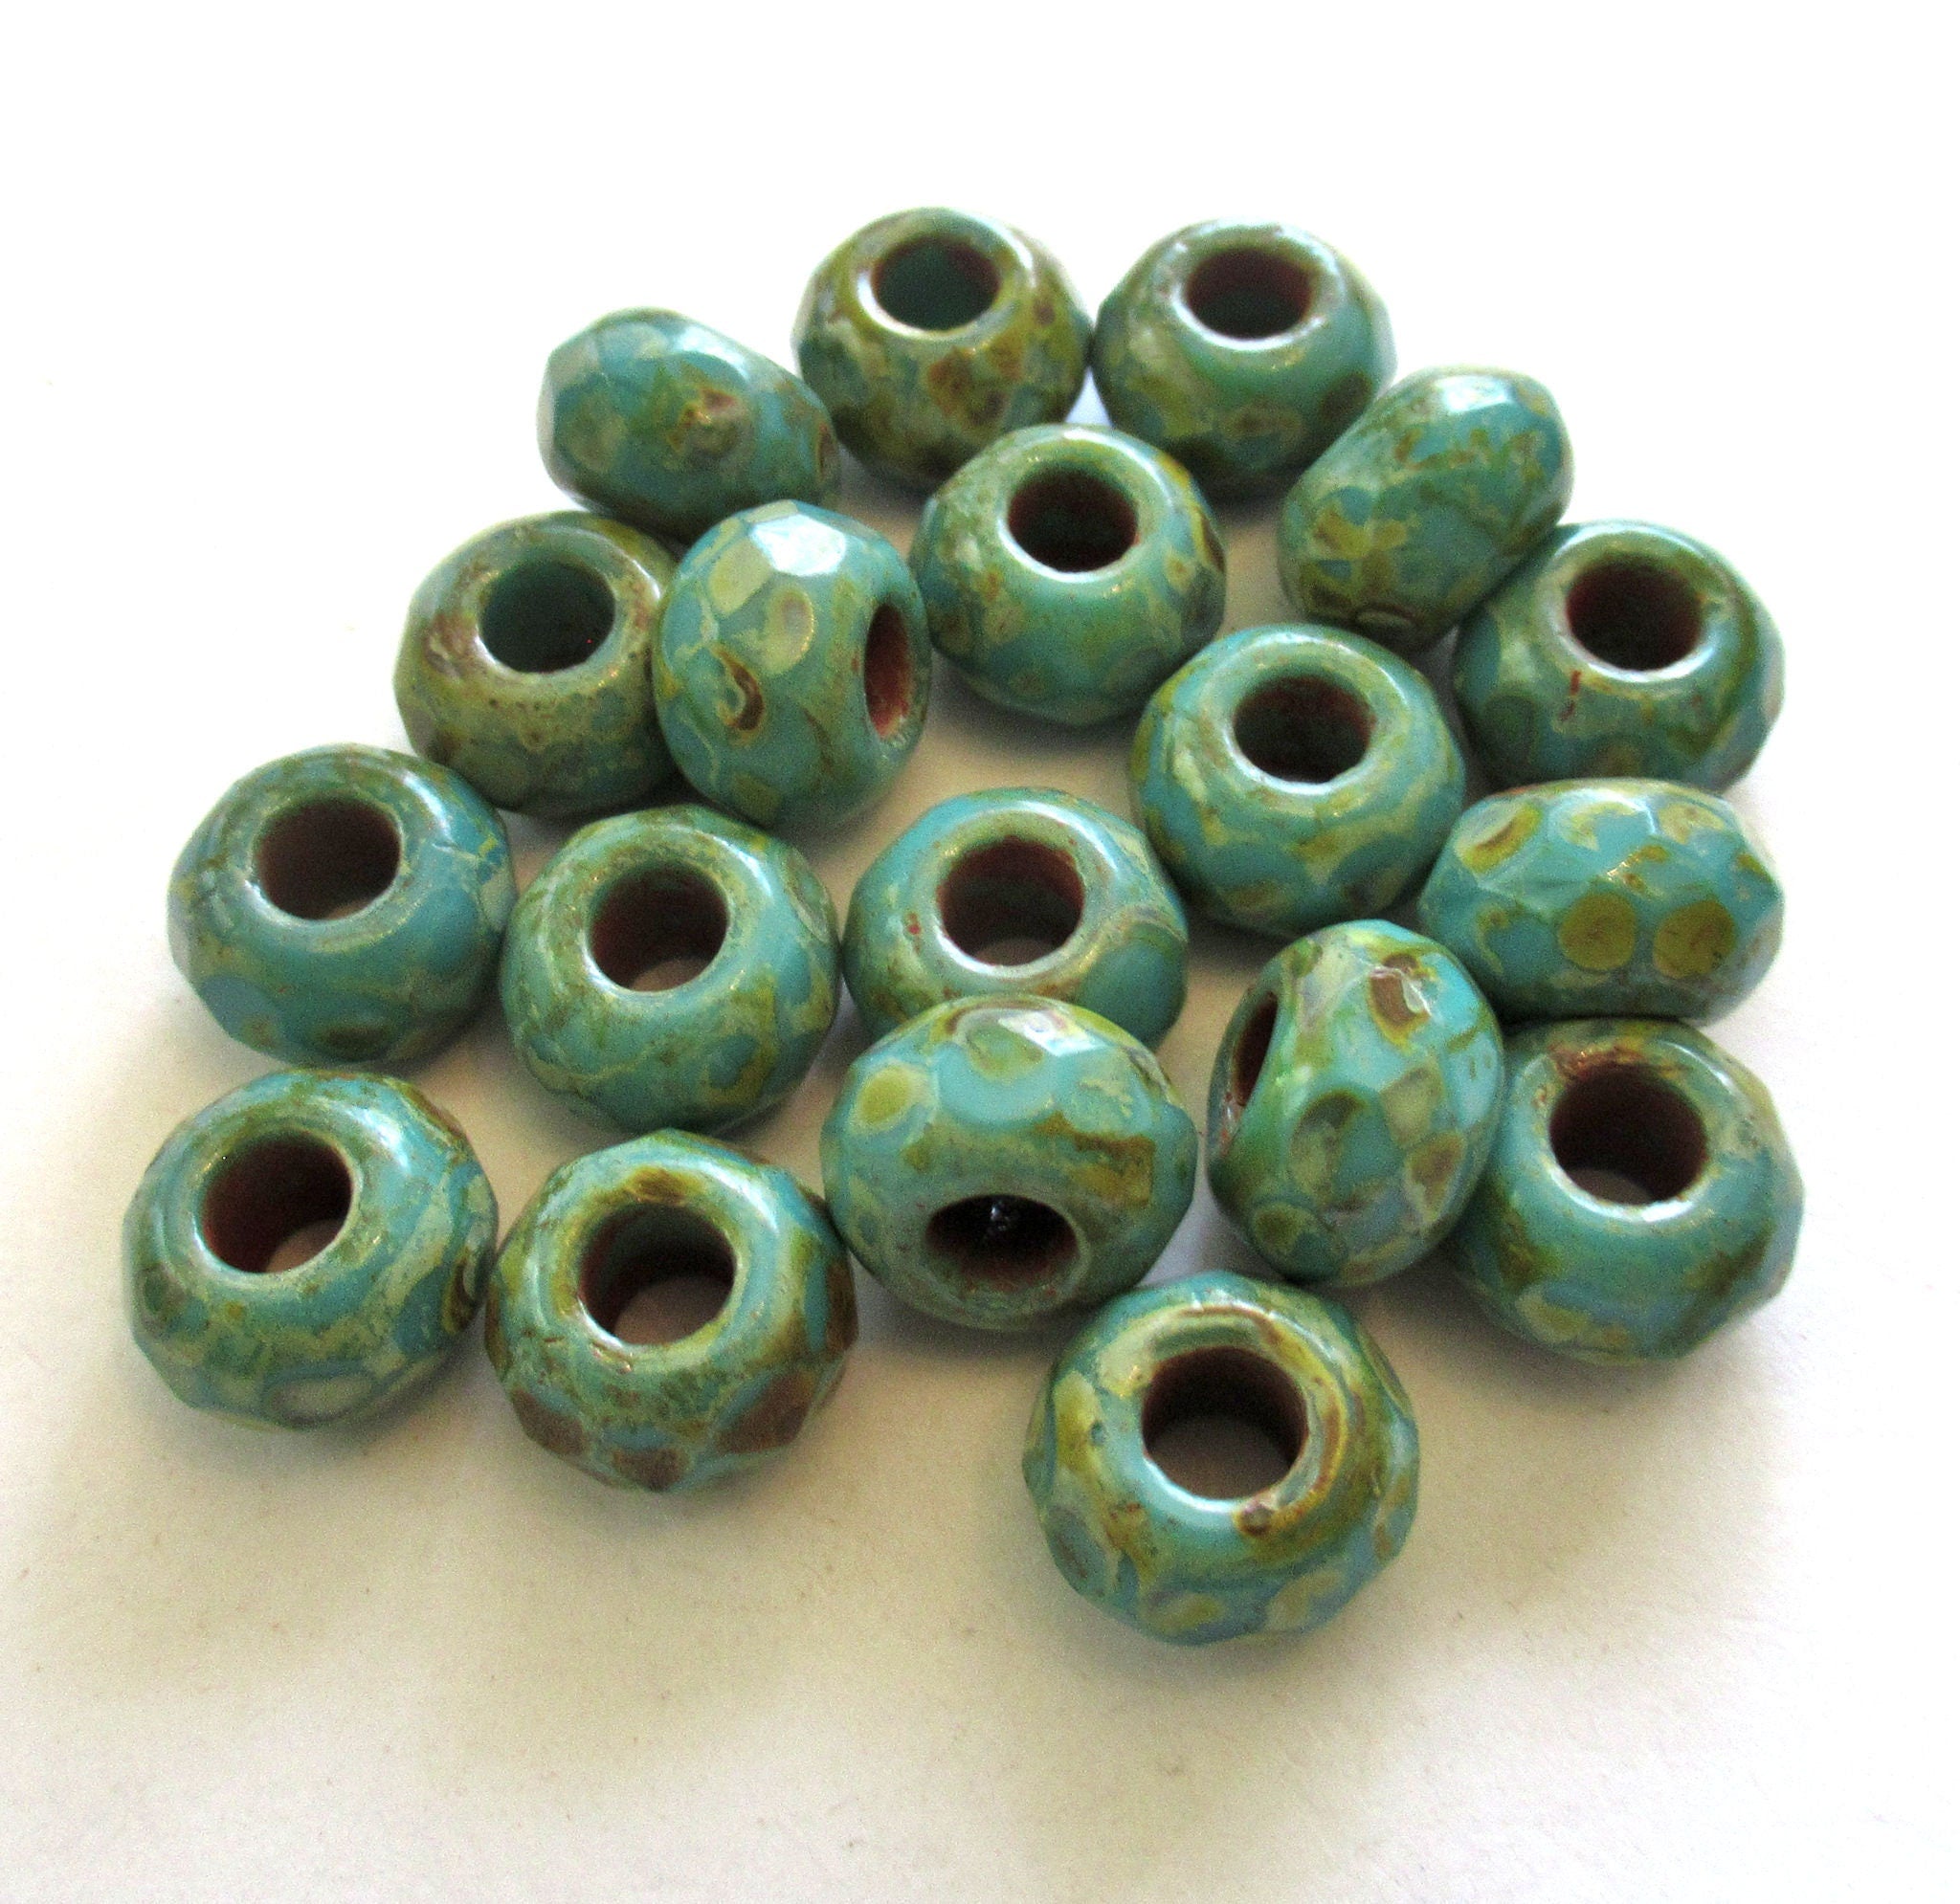 Large Hole Glass Beads, 8mm X 12mm Rondelle Roller With 5mm Hole, Mint  Green With AB Finish, 5 Pieces -  Denmark